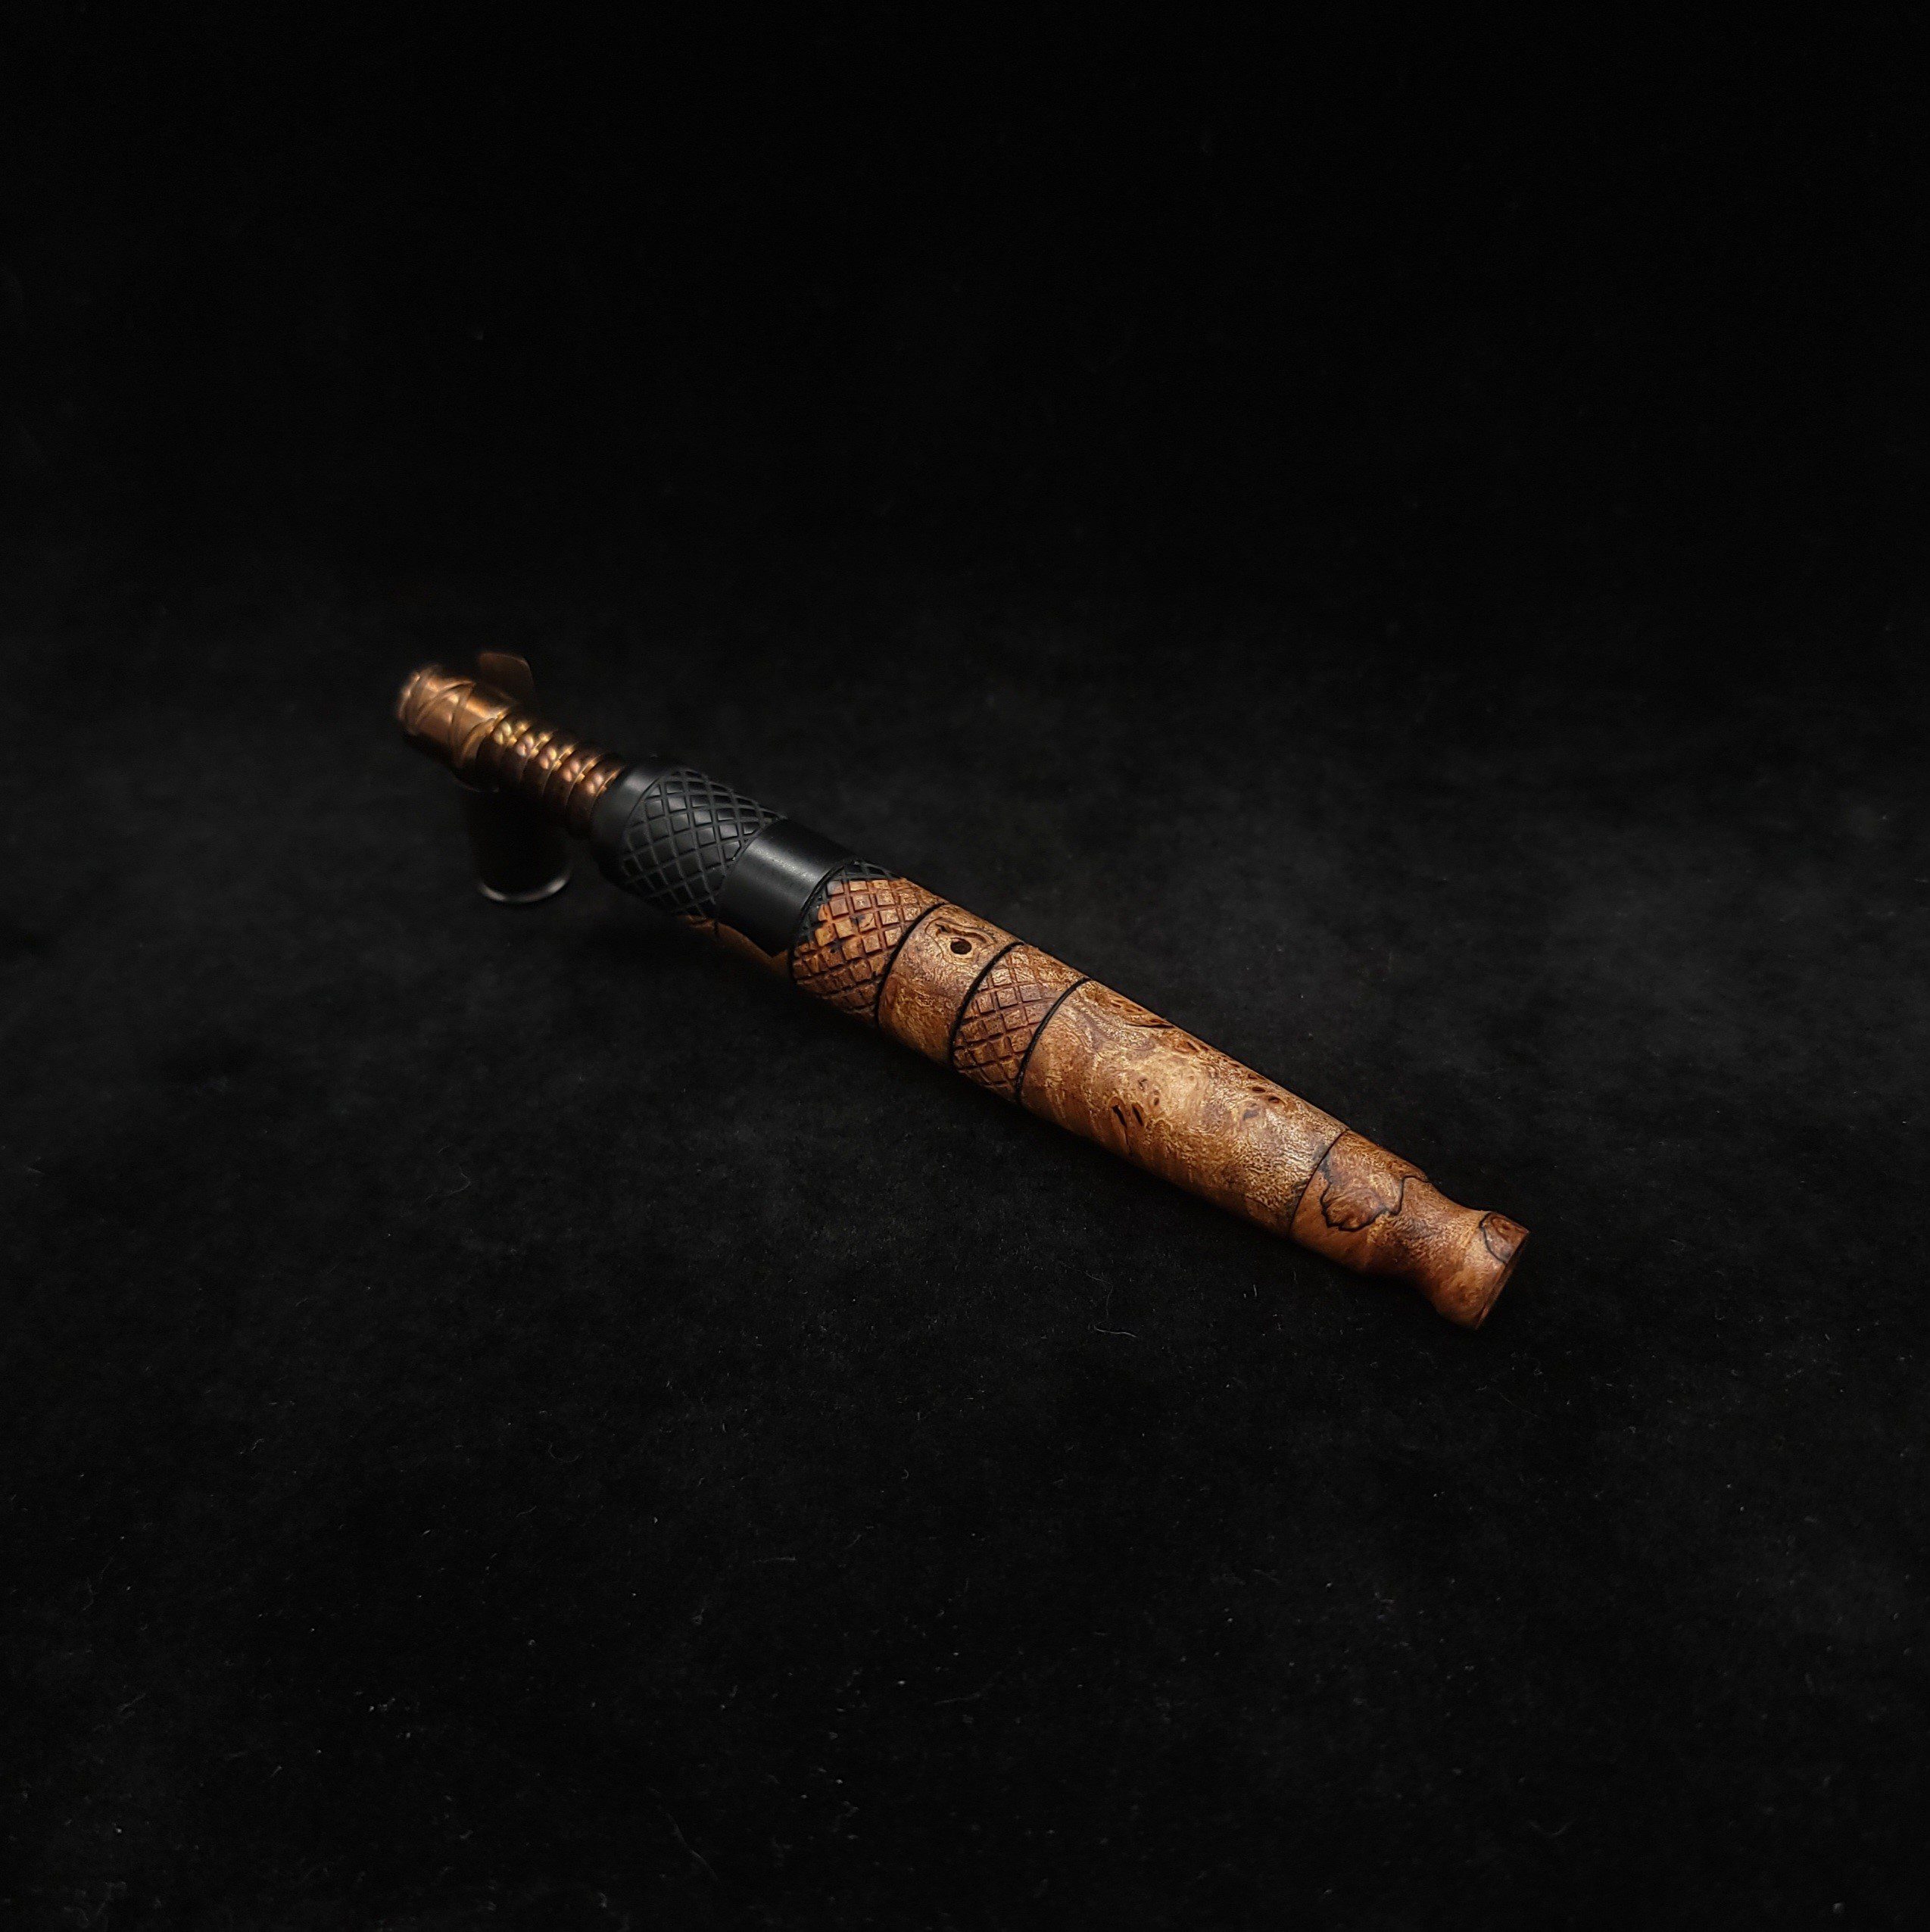 This image portrays High Class-Knurled XL Dynavap Stem/Matte Black Burl Hybrid + Matching Mouthpiece by Dovetail Woodwork.